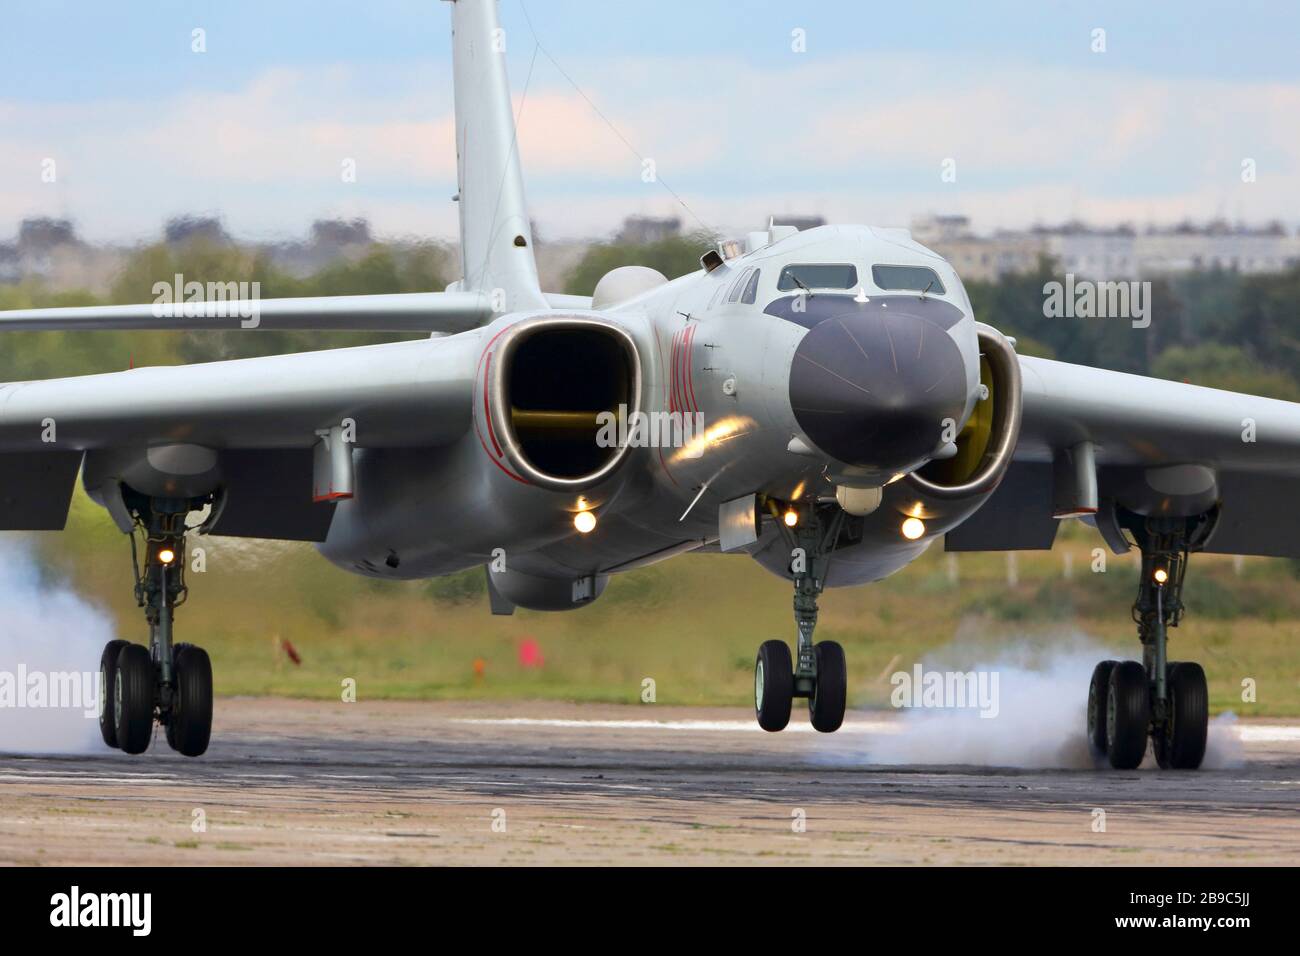 H-6K strategic bomber of the Chinese People's Liberation Army Air Force. Stock Photo